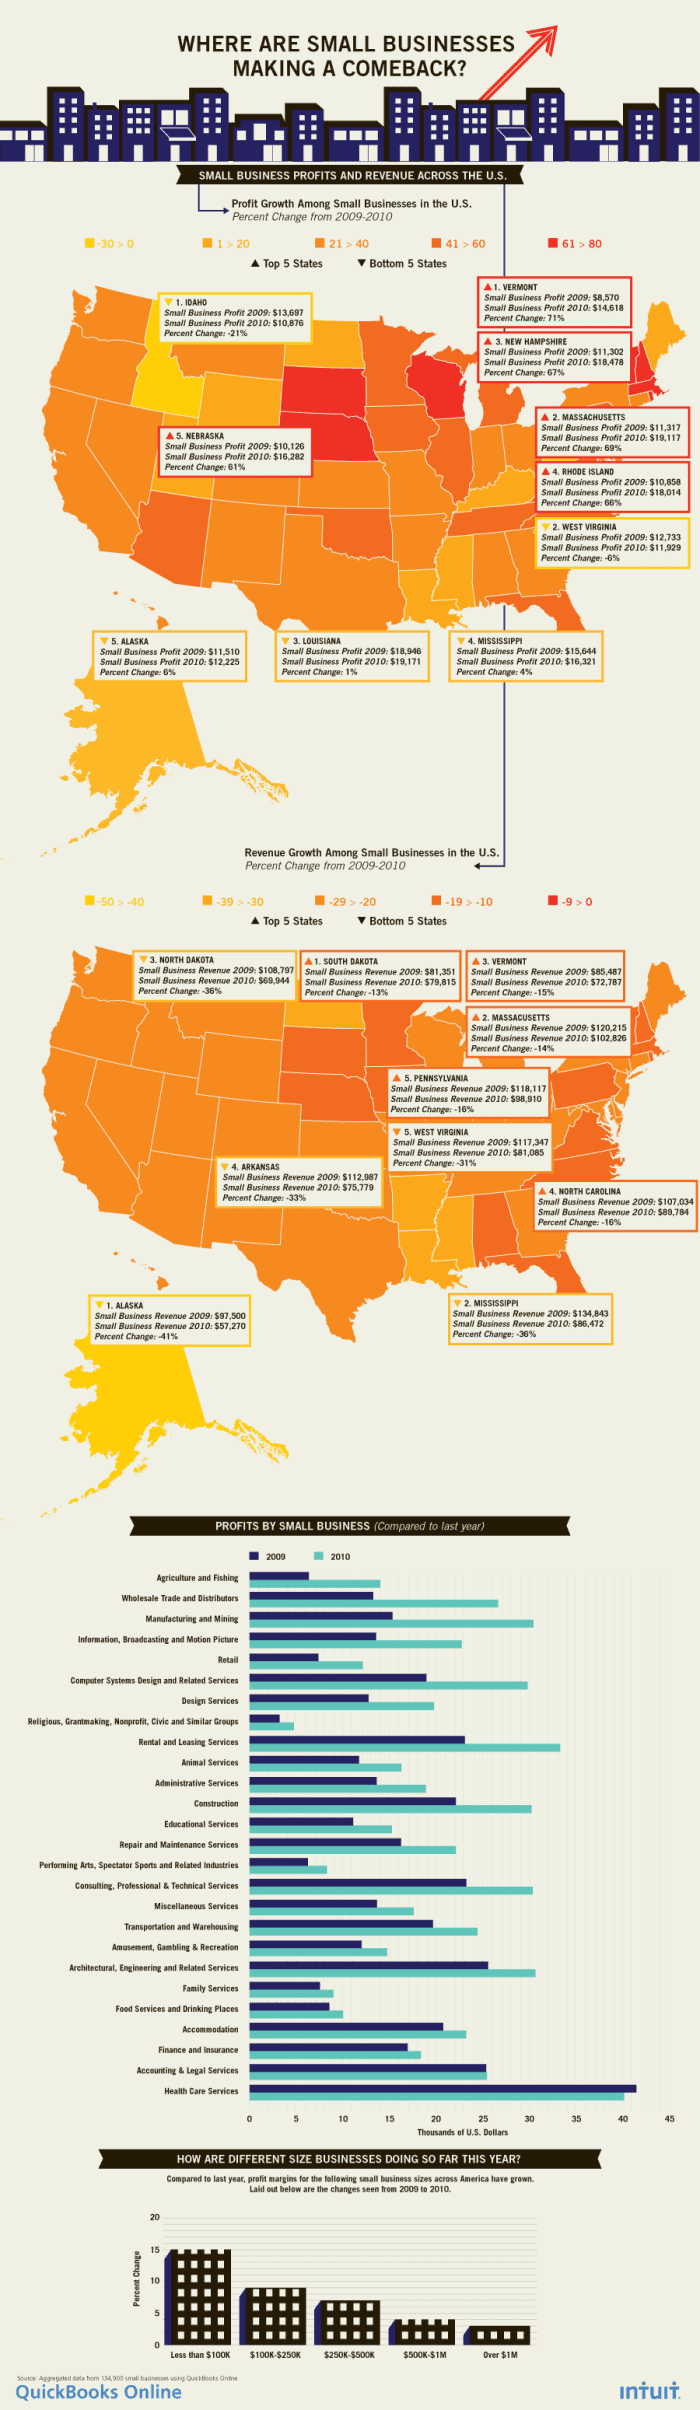 Where Small Businesses Are Thriving Infographic